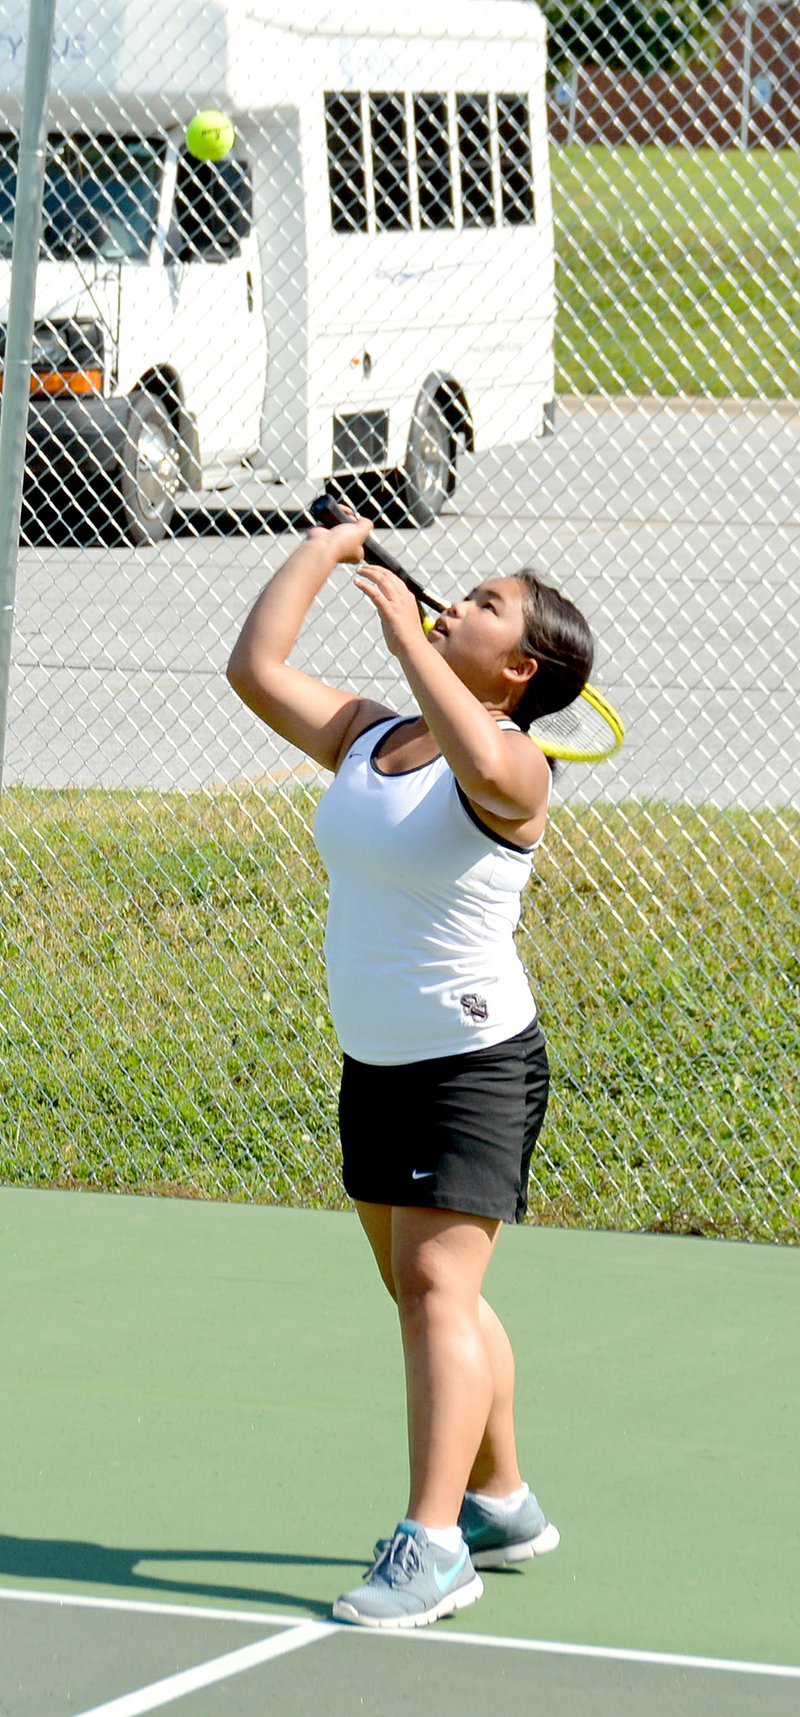 Graham Thomas/Herald-Leader Siloam Springs sophomore Valerie Lee serves during a junior varsity doubles match Monday against Shiloh Christian at the JBU Tennis Complex.